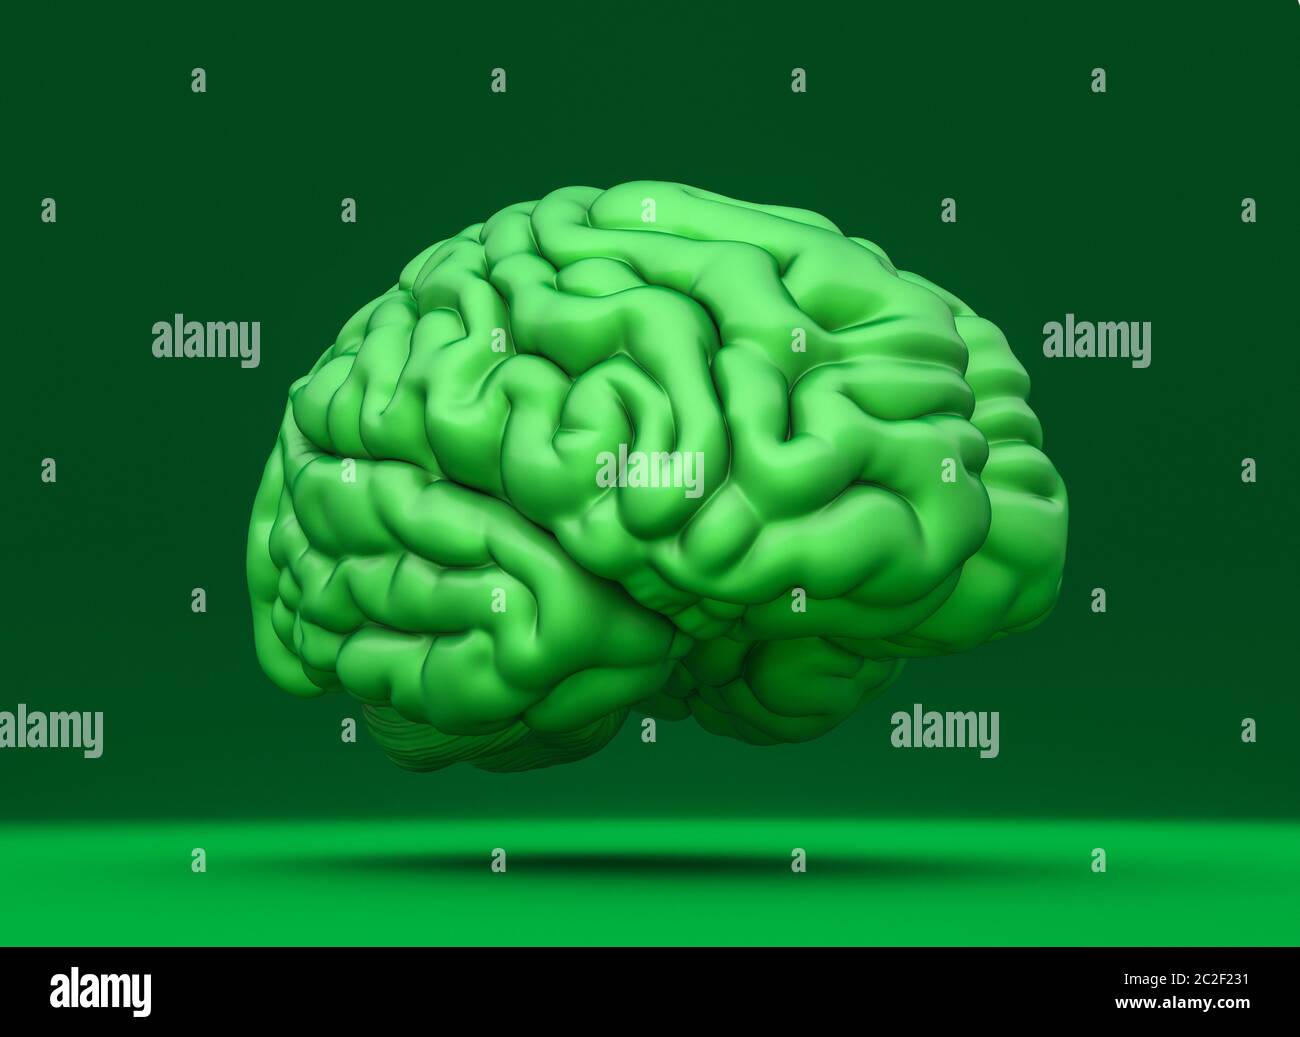 green brain on monochrome background. Ecological thinking concept. 3d render. nobody around. Stock Photo